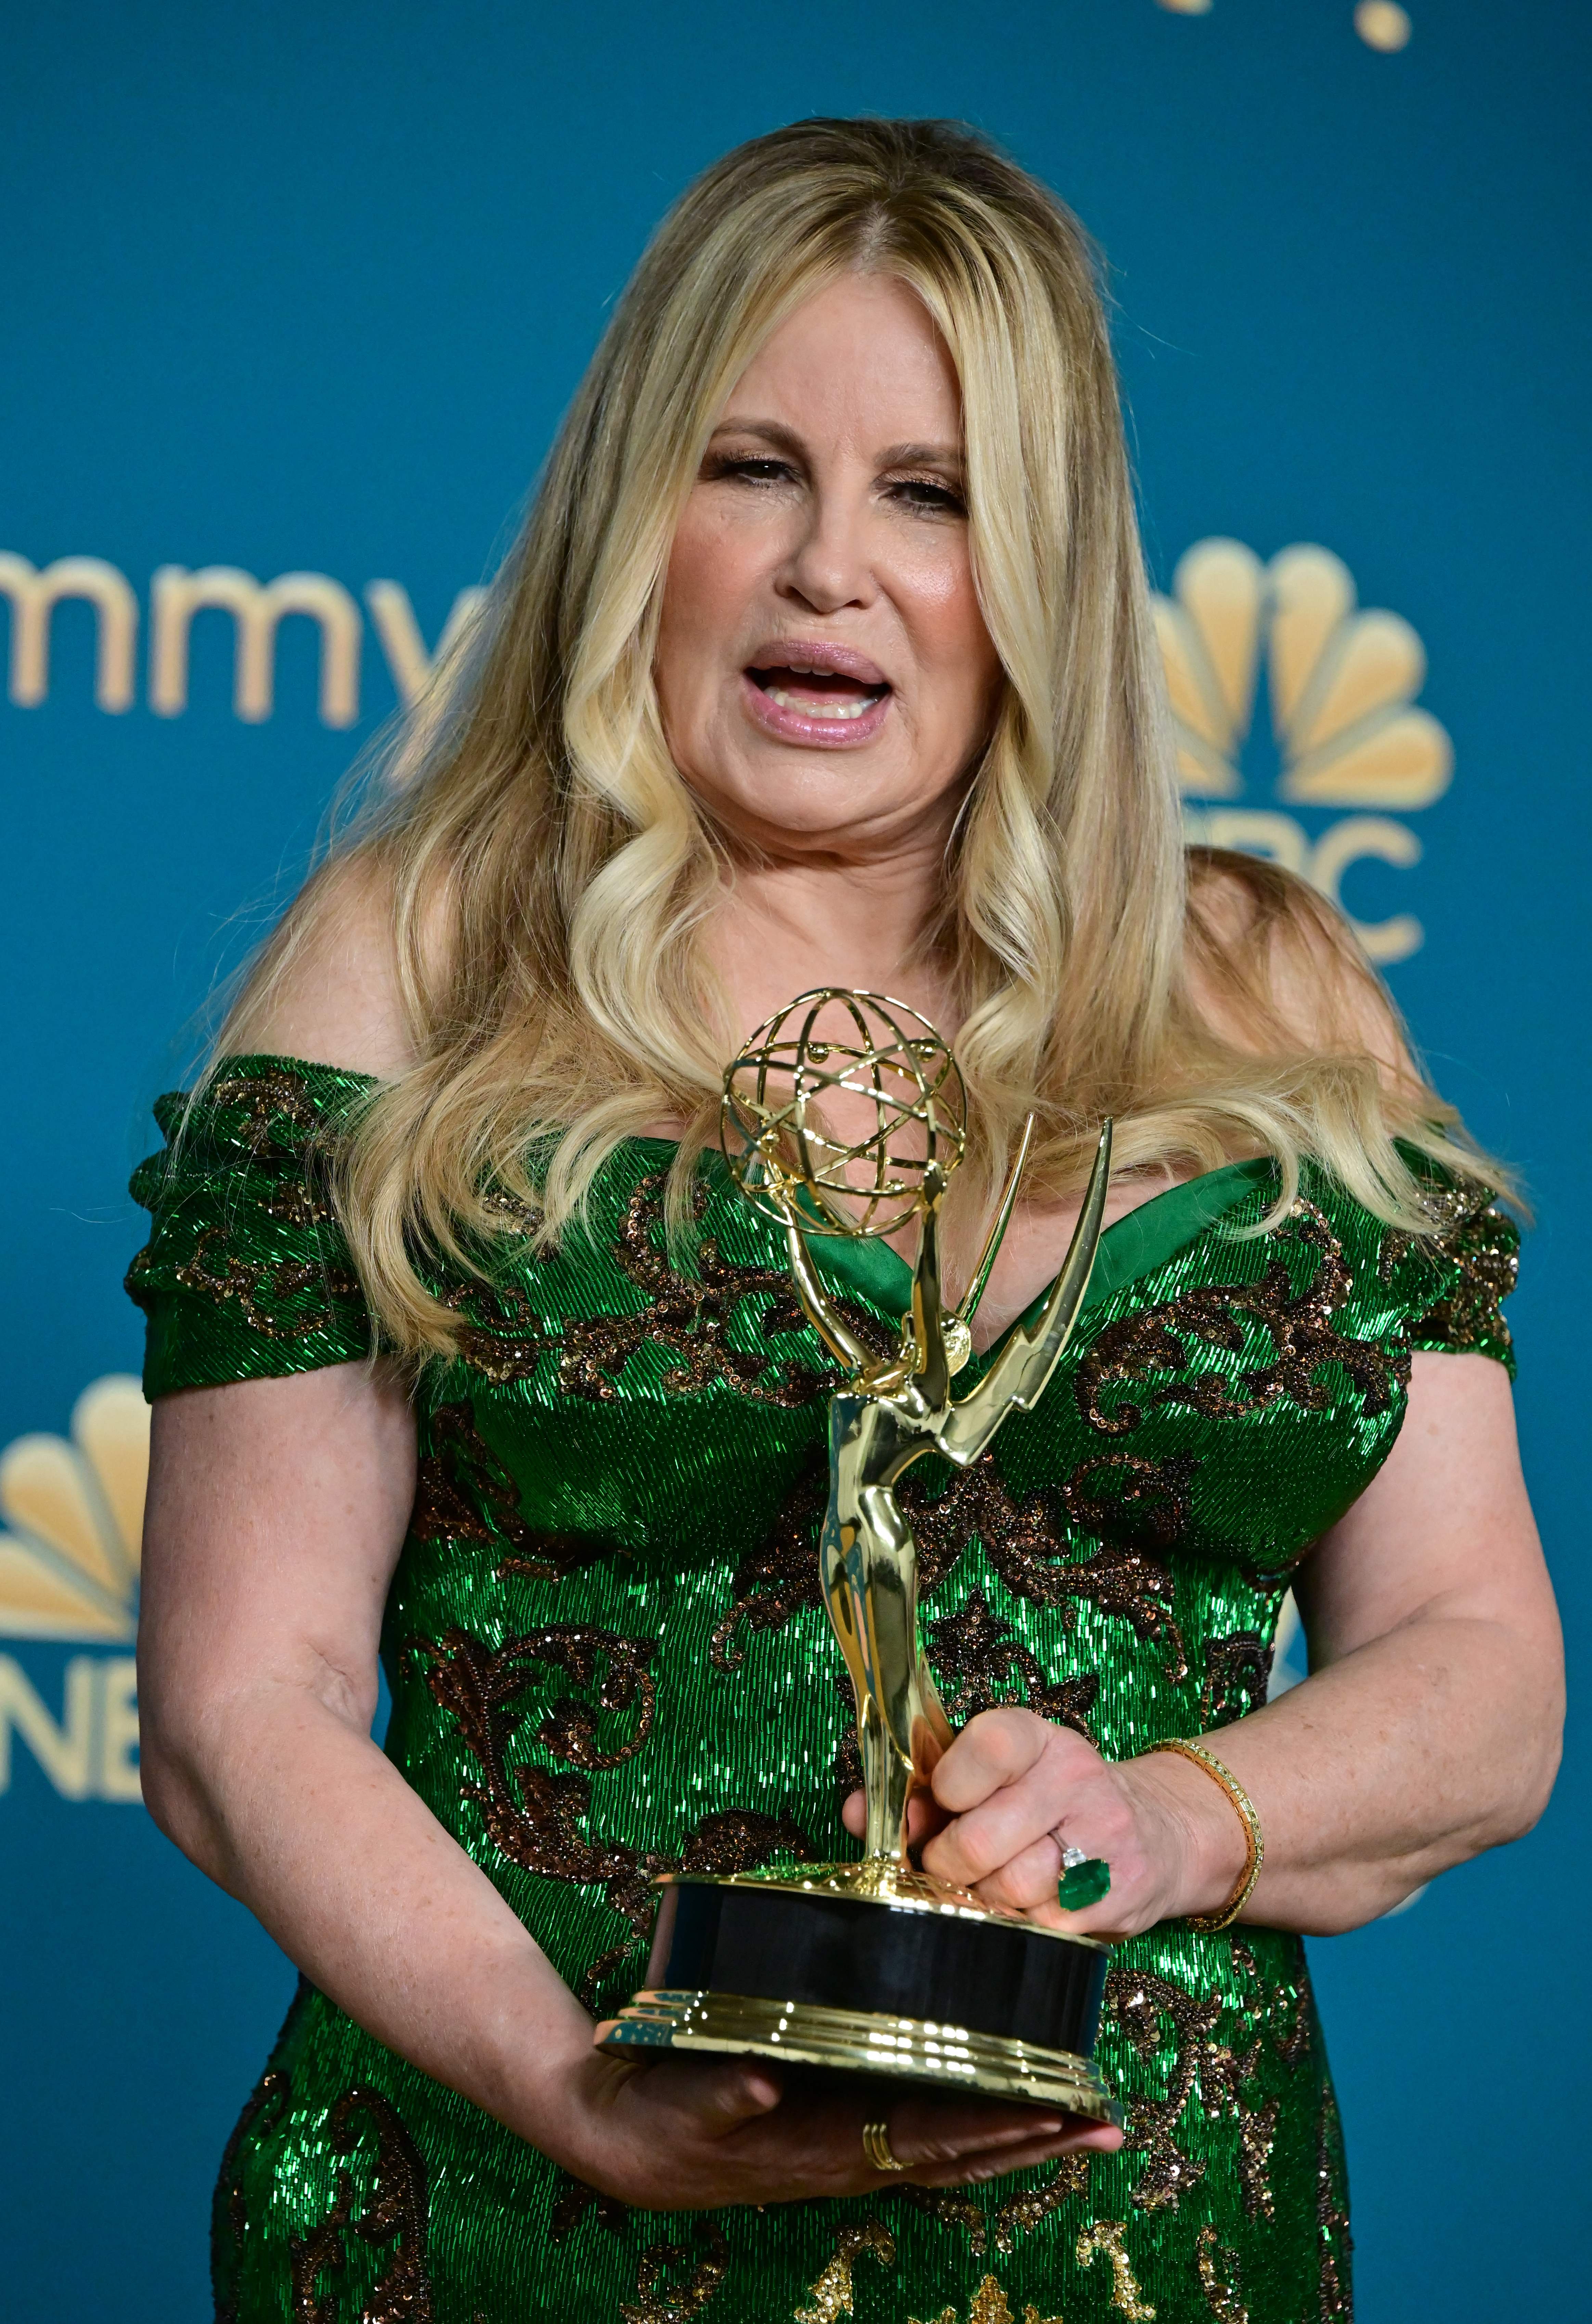 Jennifer Coolidge poses with her Emmy for Outstanding Supporting Actress In A Limited or Anthology Series or Movie for "The White Lotus" during the 74th Emmy Awards at the Microsoft Theater in Los Angeles, California, on September 12, 2022. | Source: Getty Images